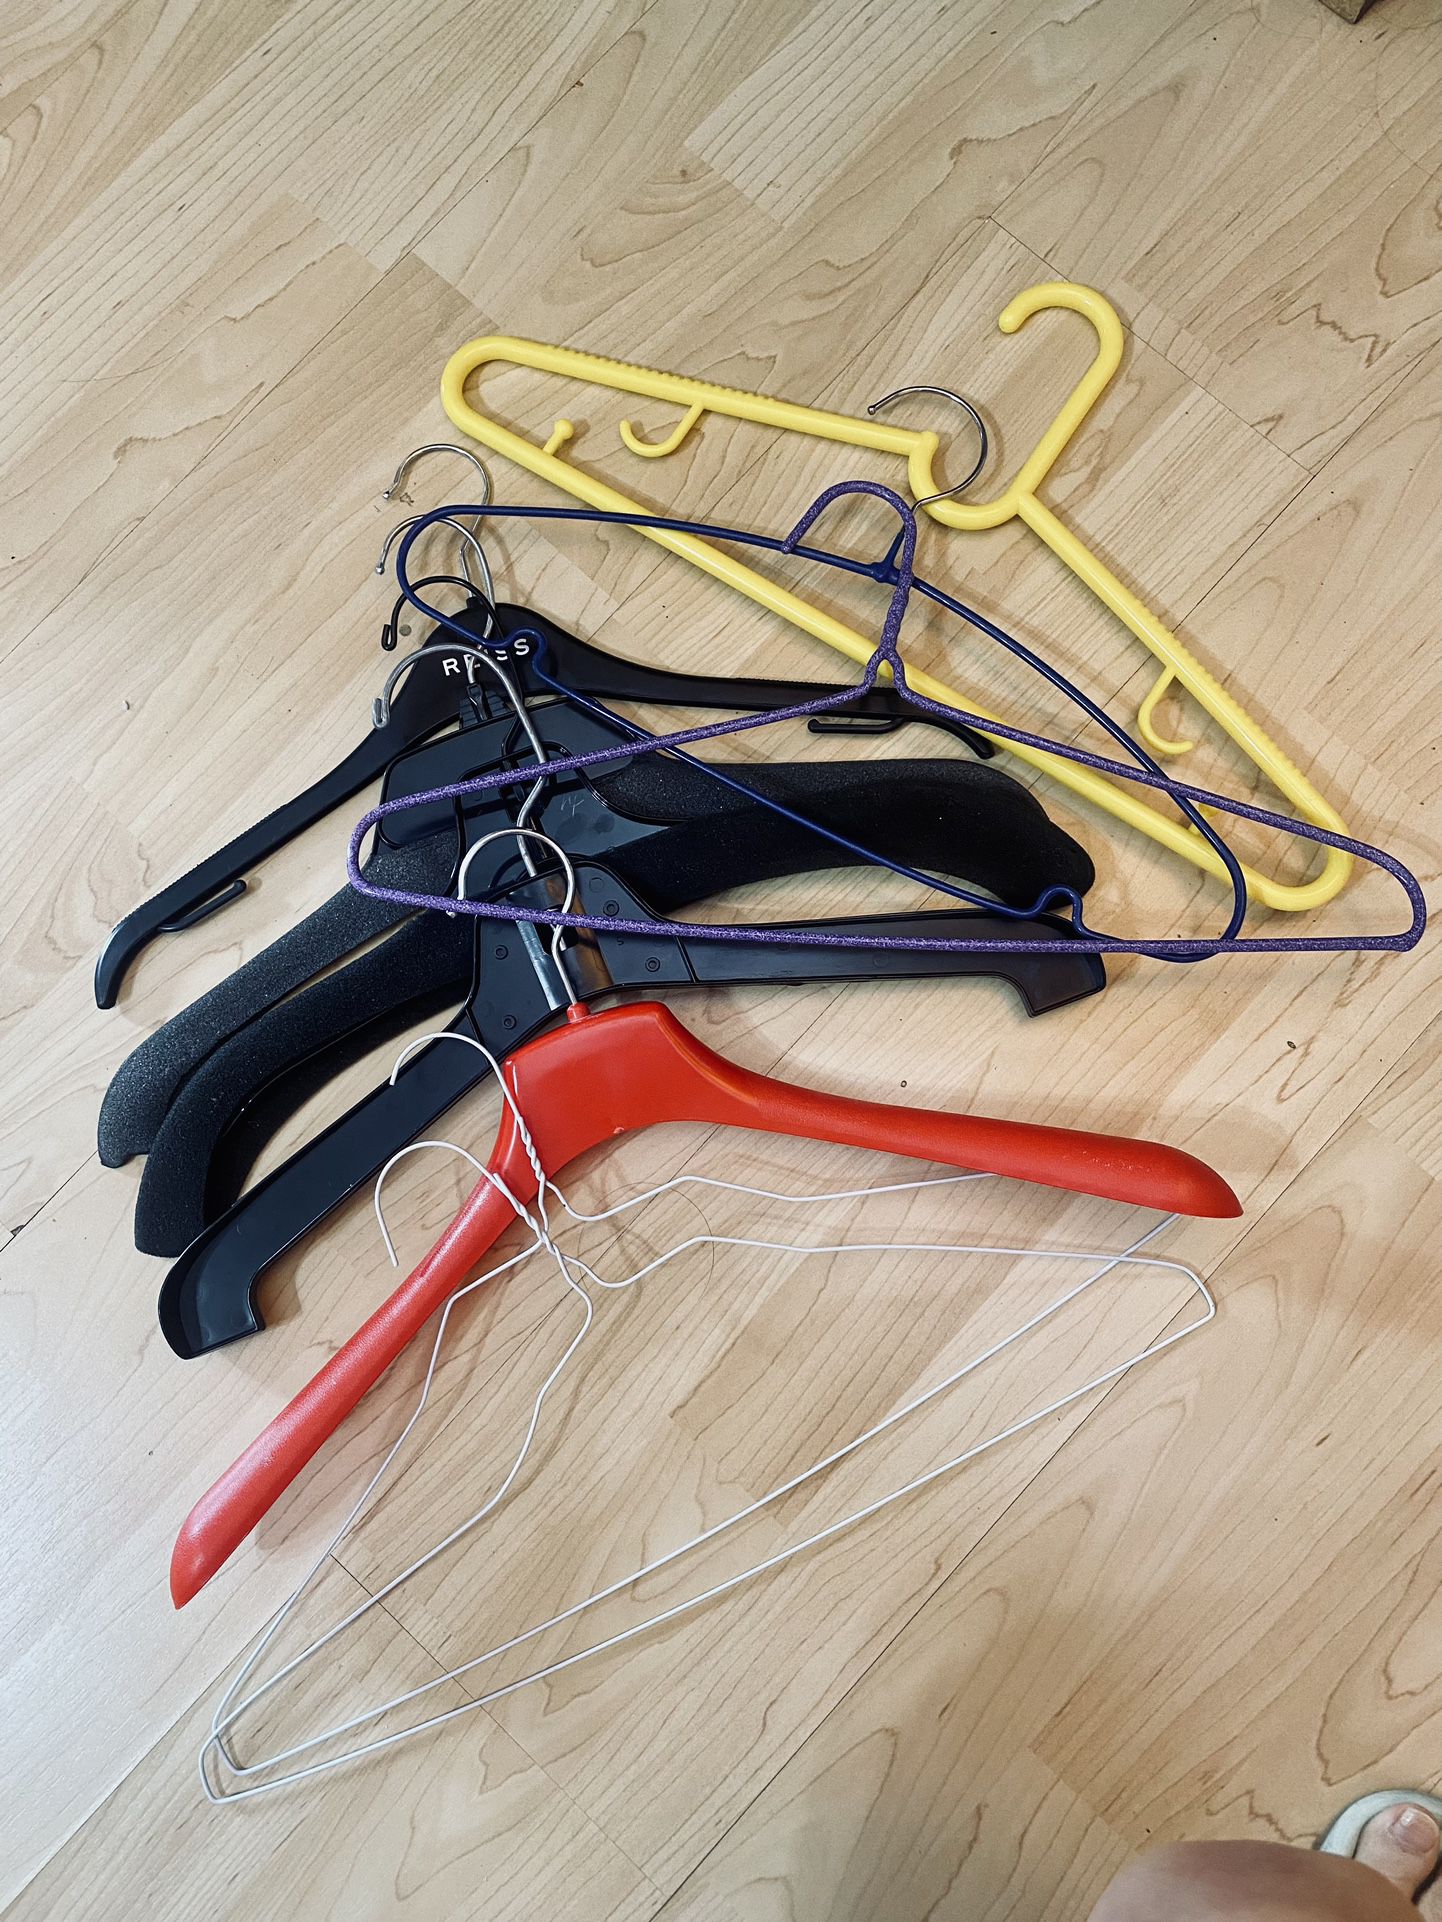 Free- 10 ct Clothes Hangers 